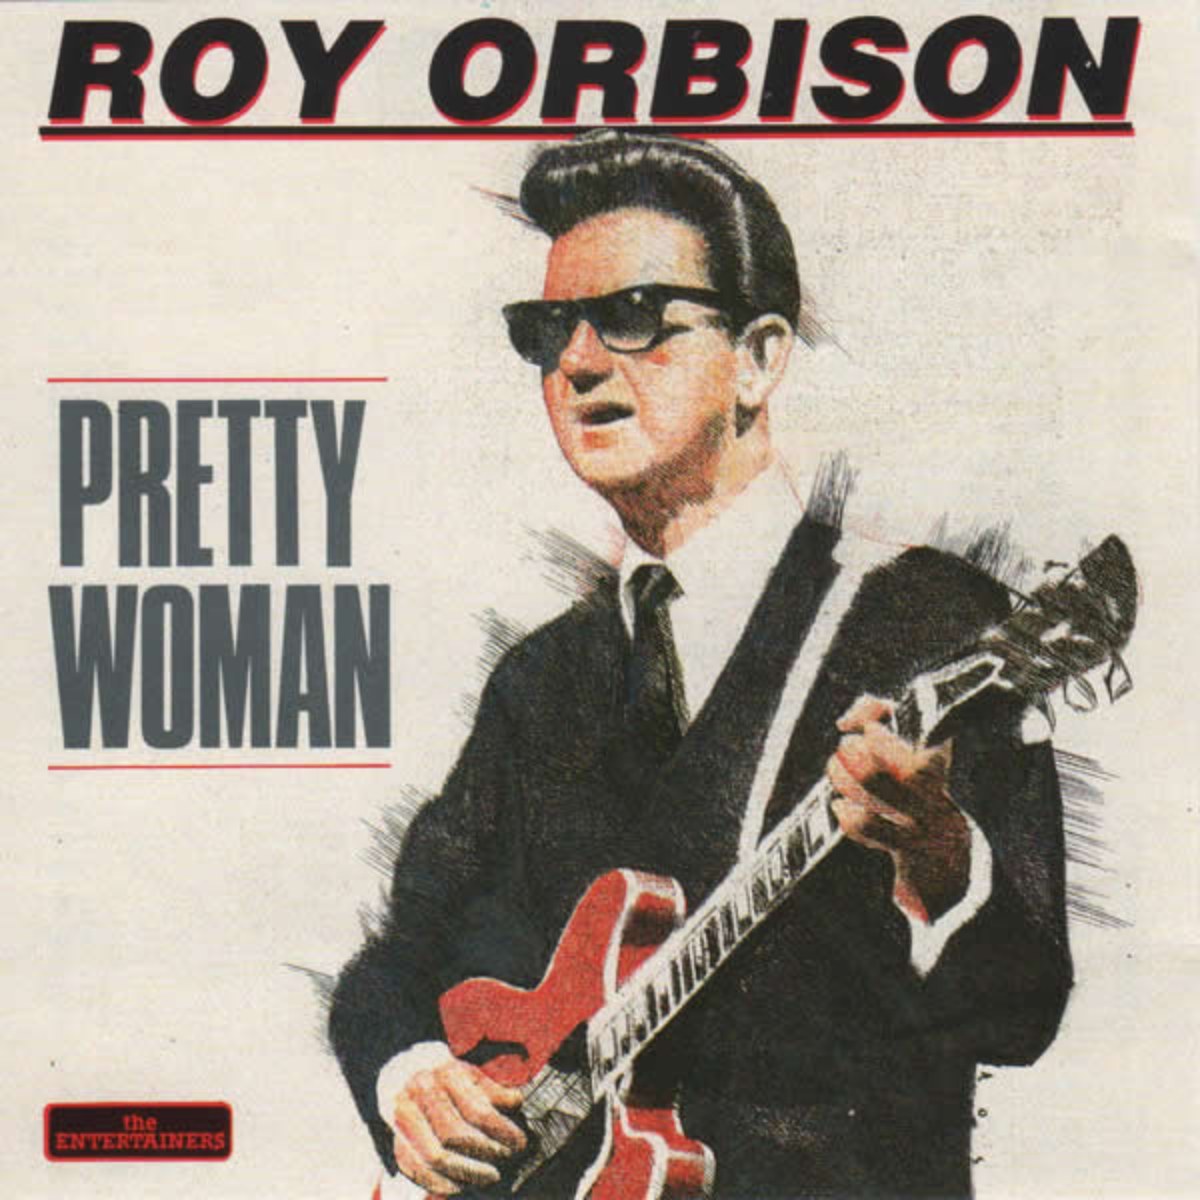 Cover of the single "oh, Pretty Woman."